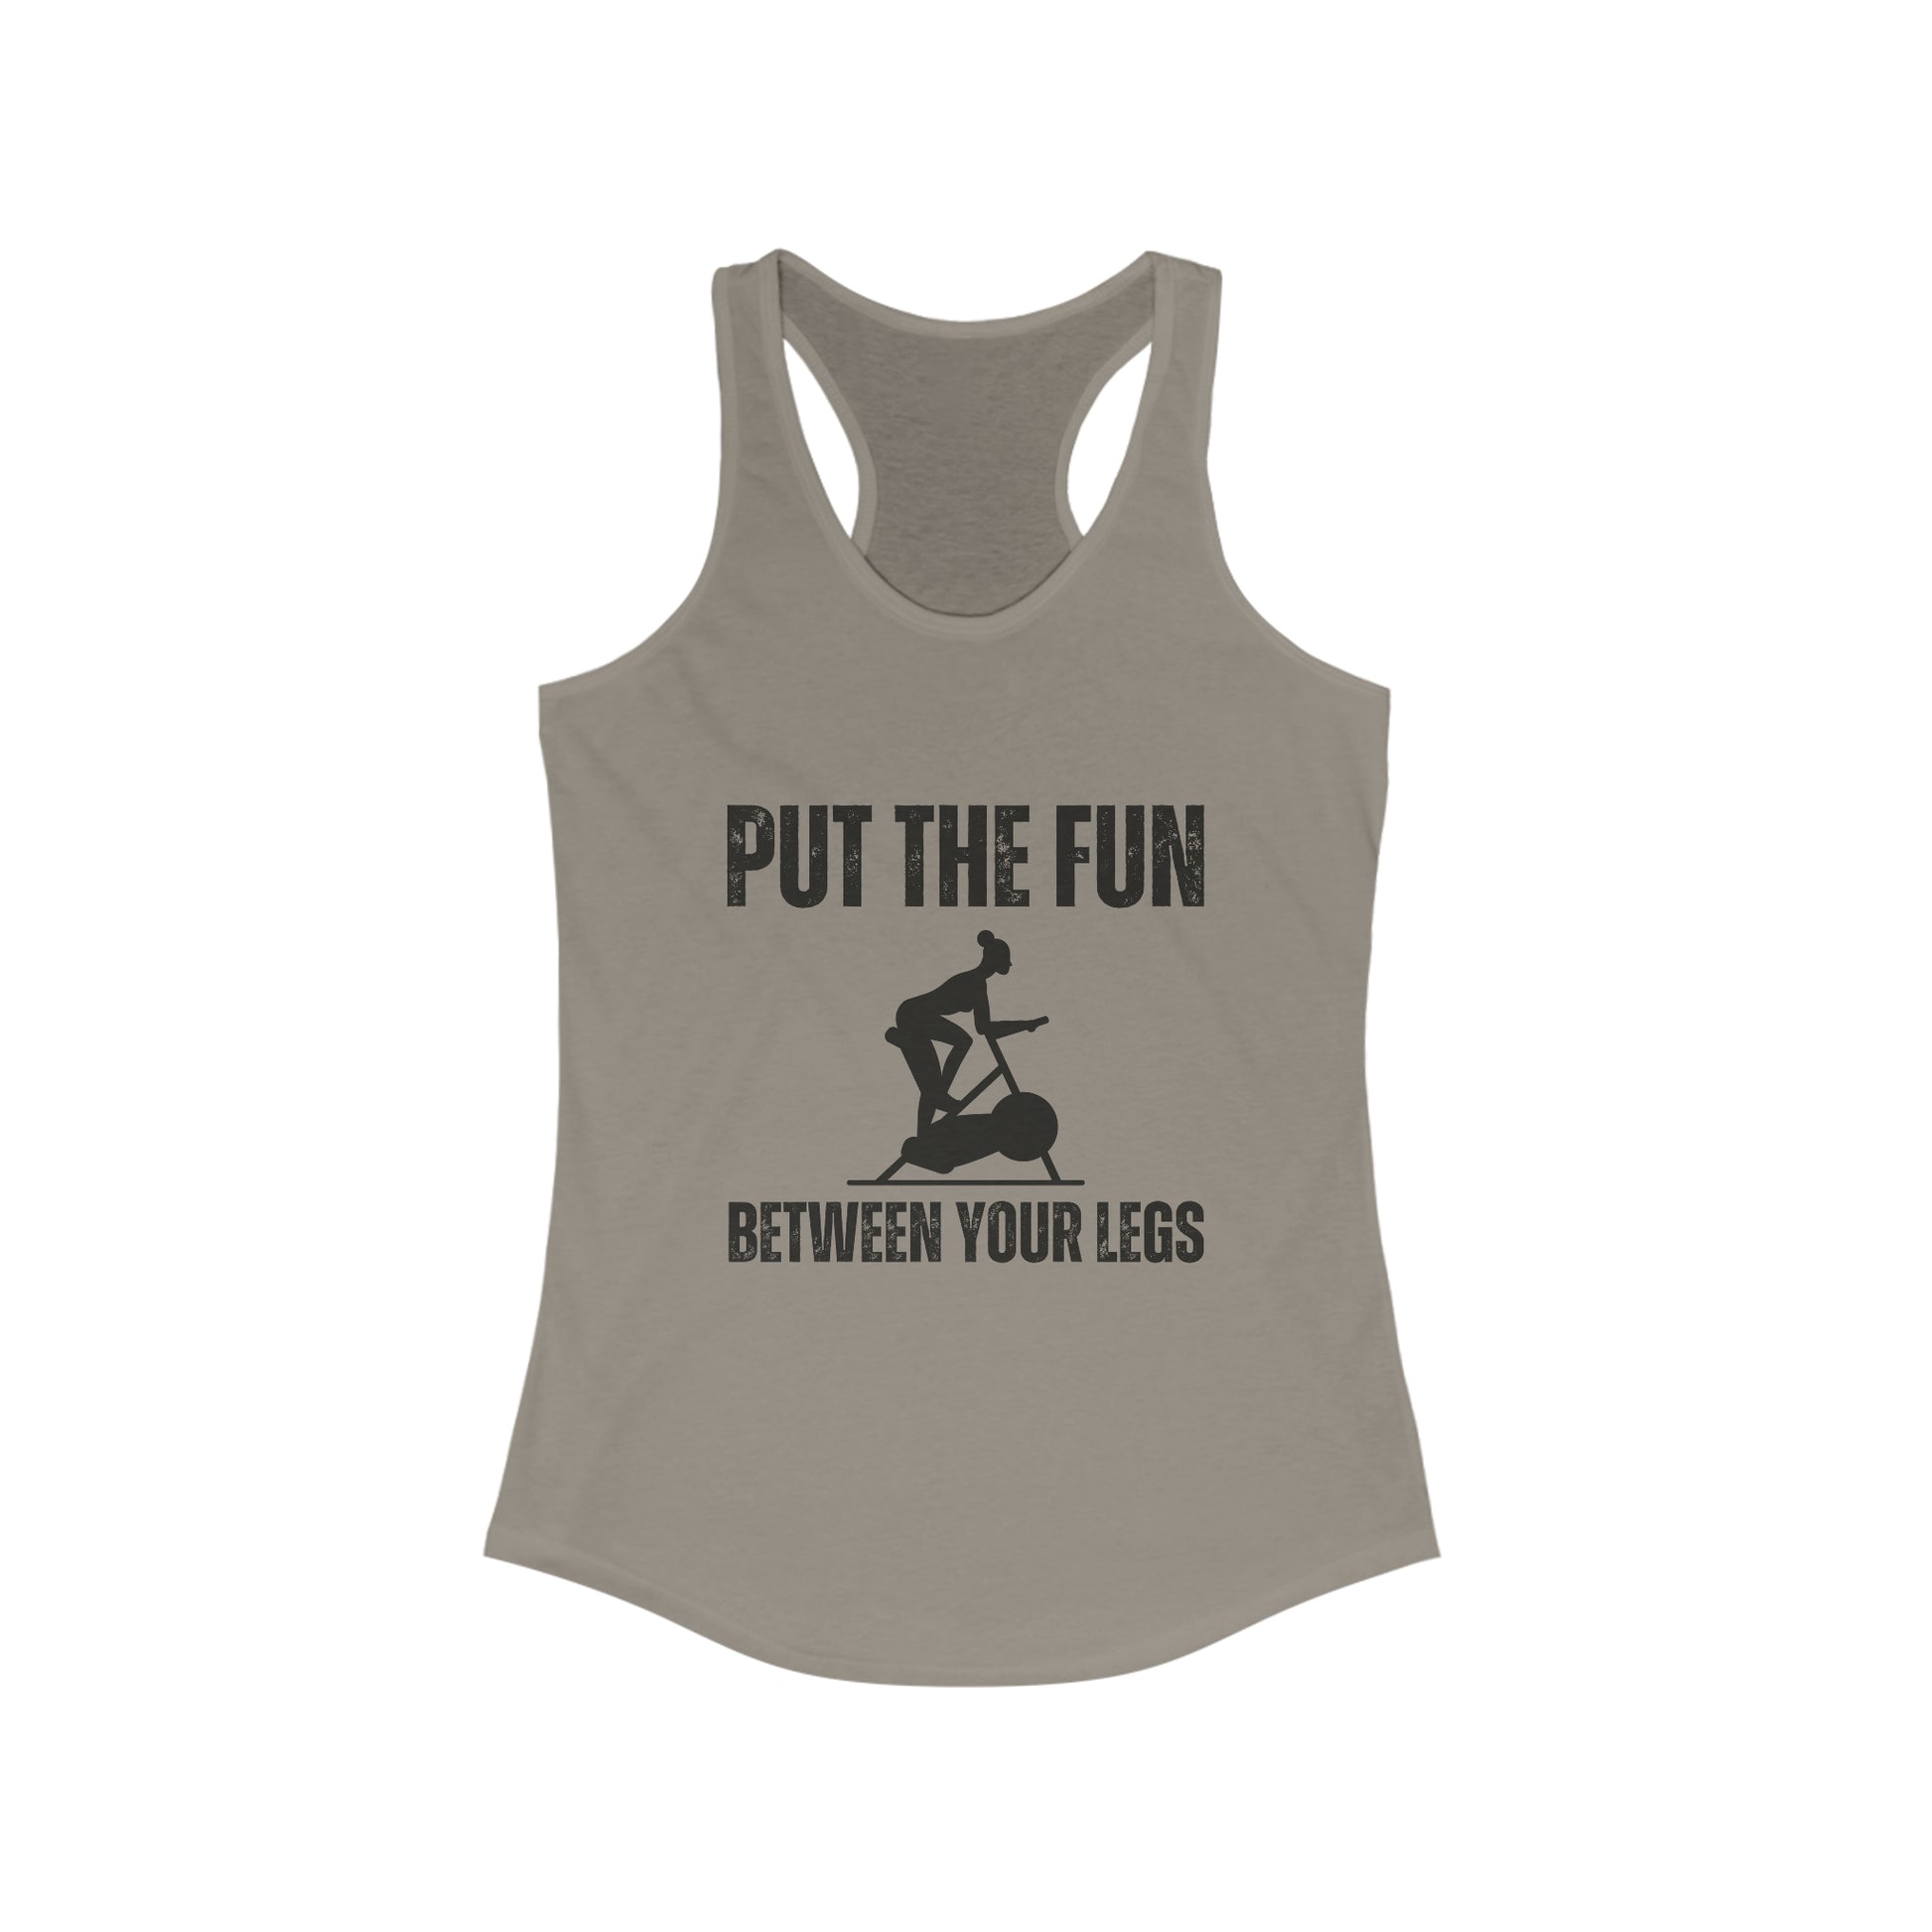 Funny cycling class top